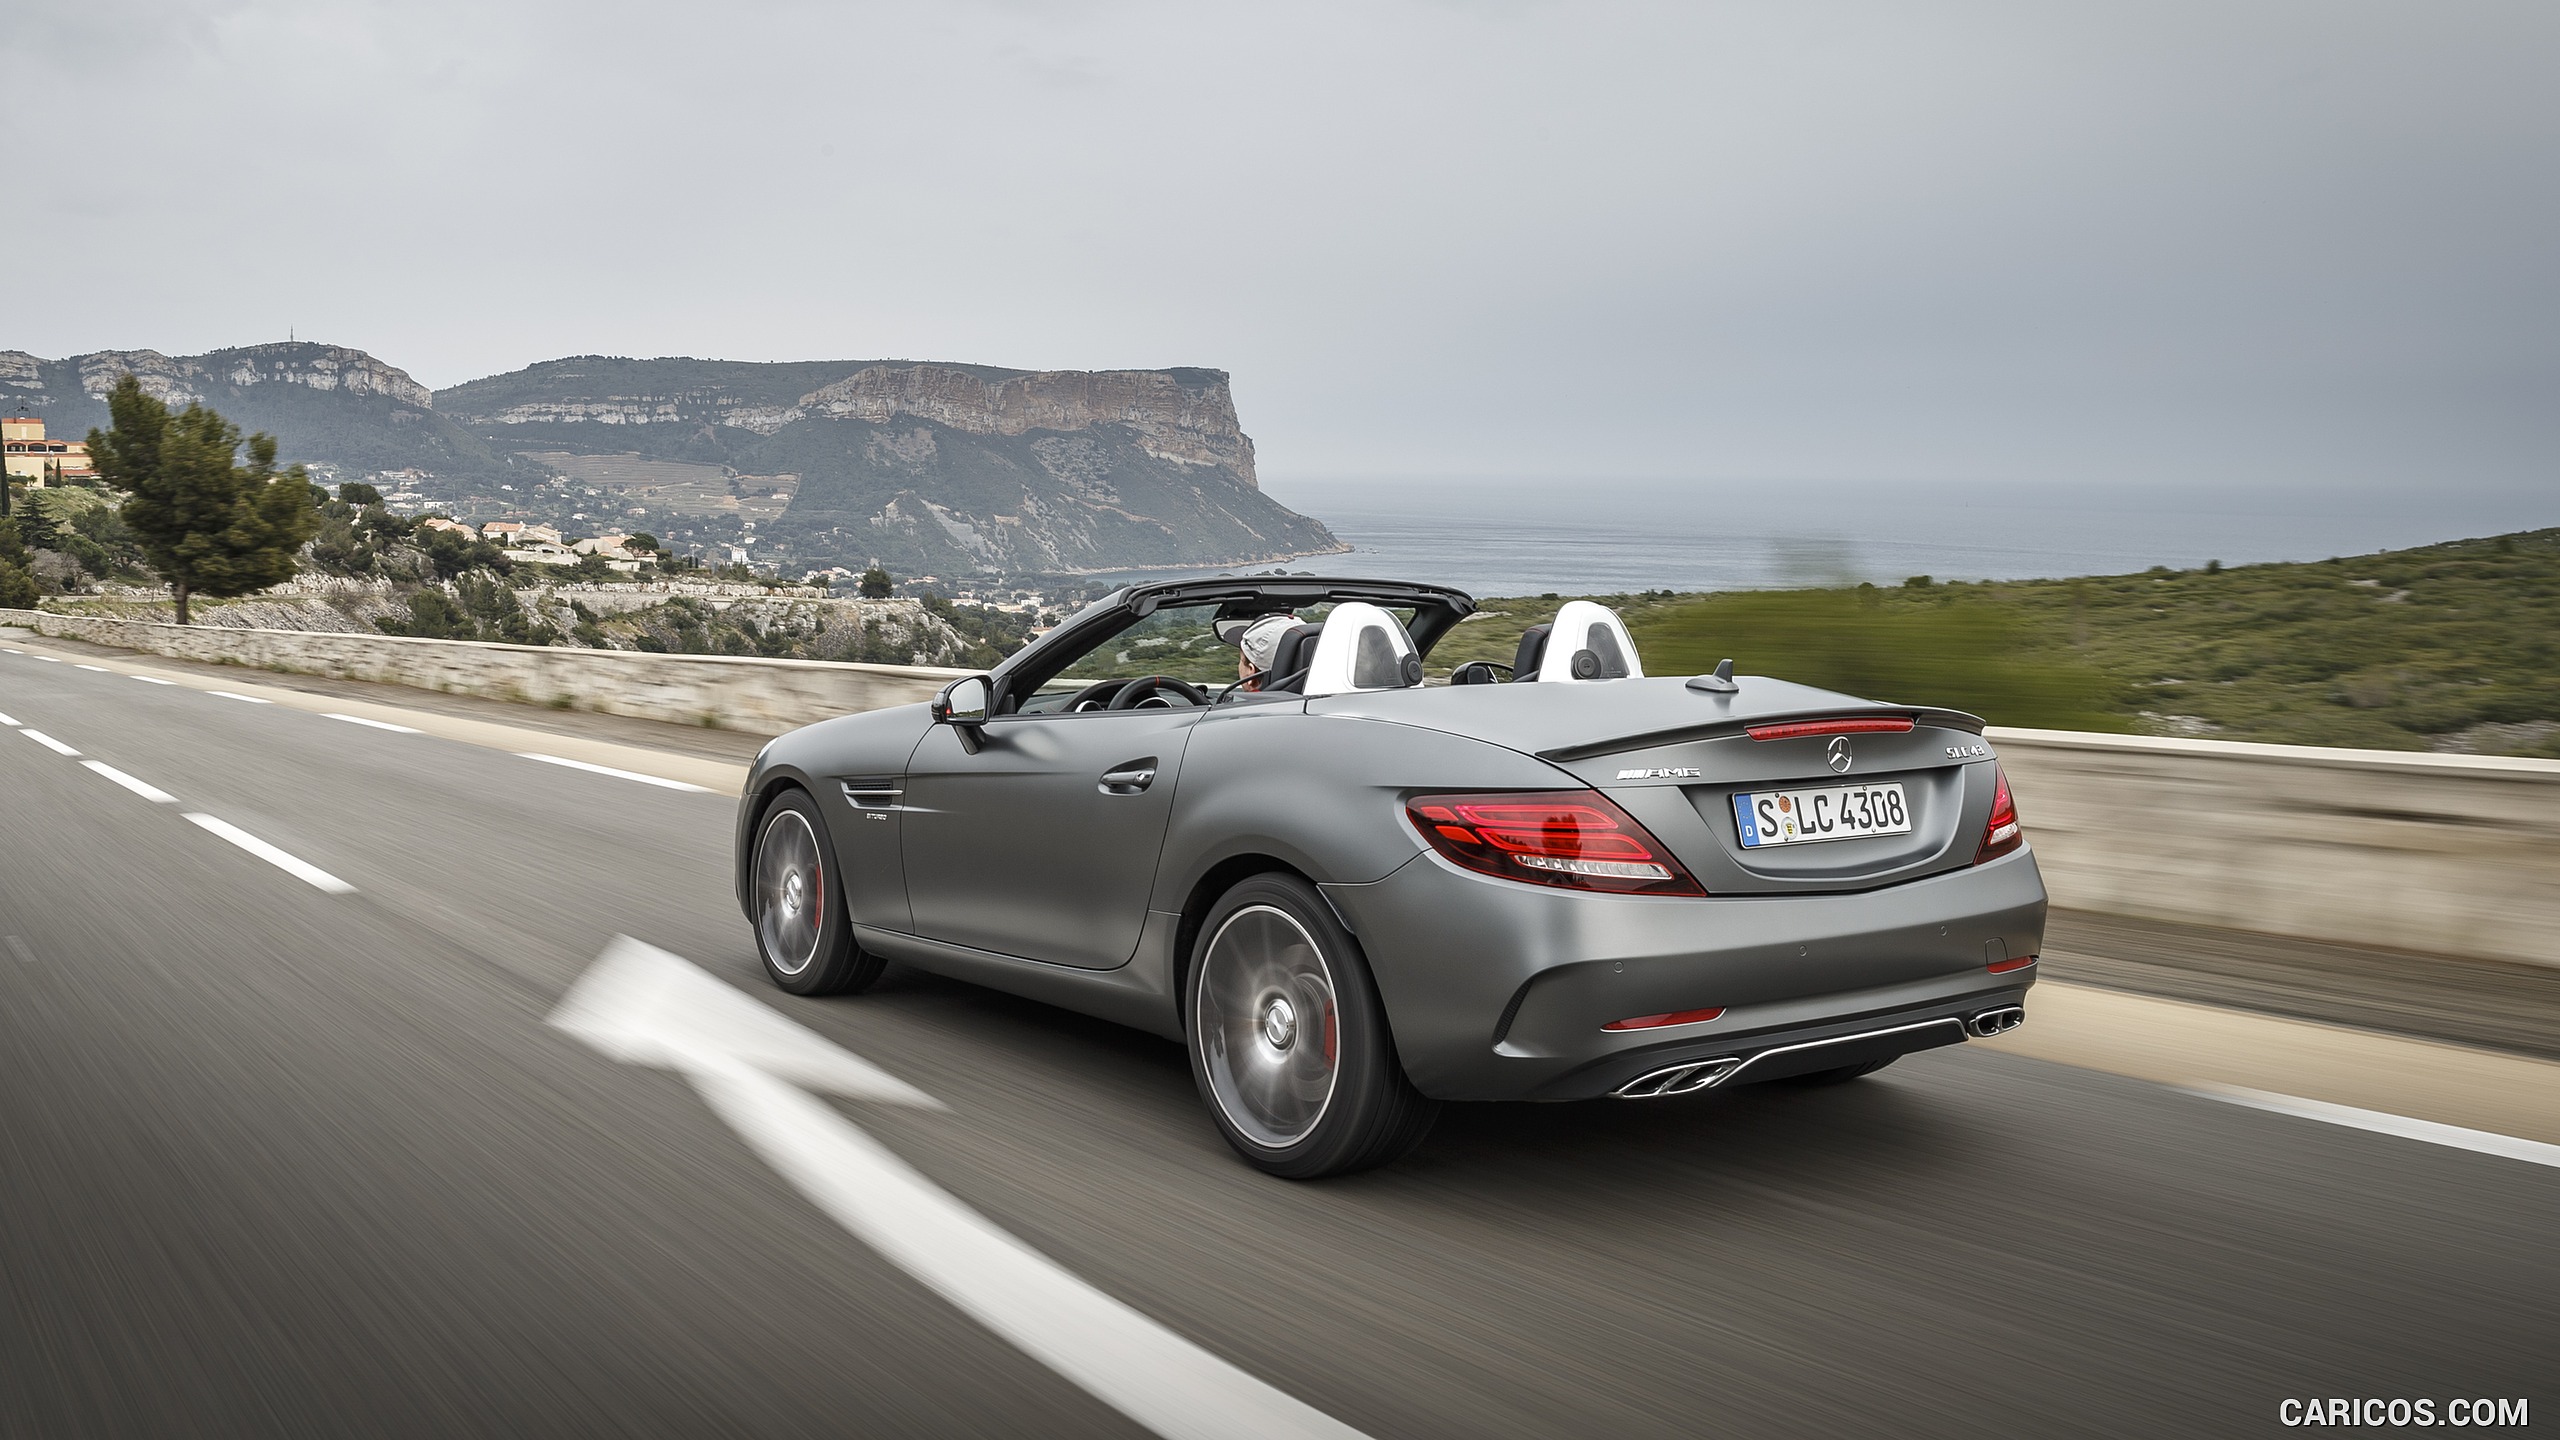 2017 Mercedes-AMG SLC 43 - Top Down - Rear, #52 of 92